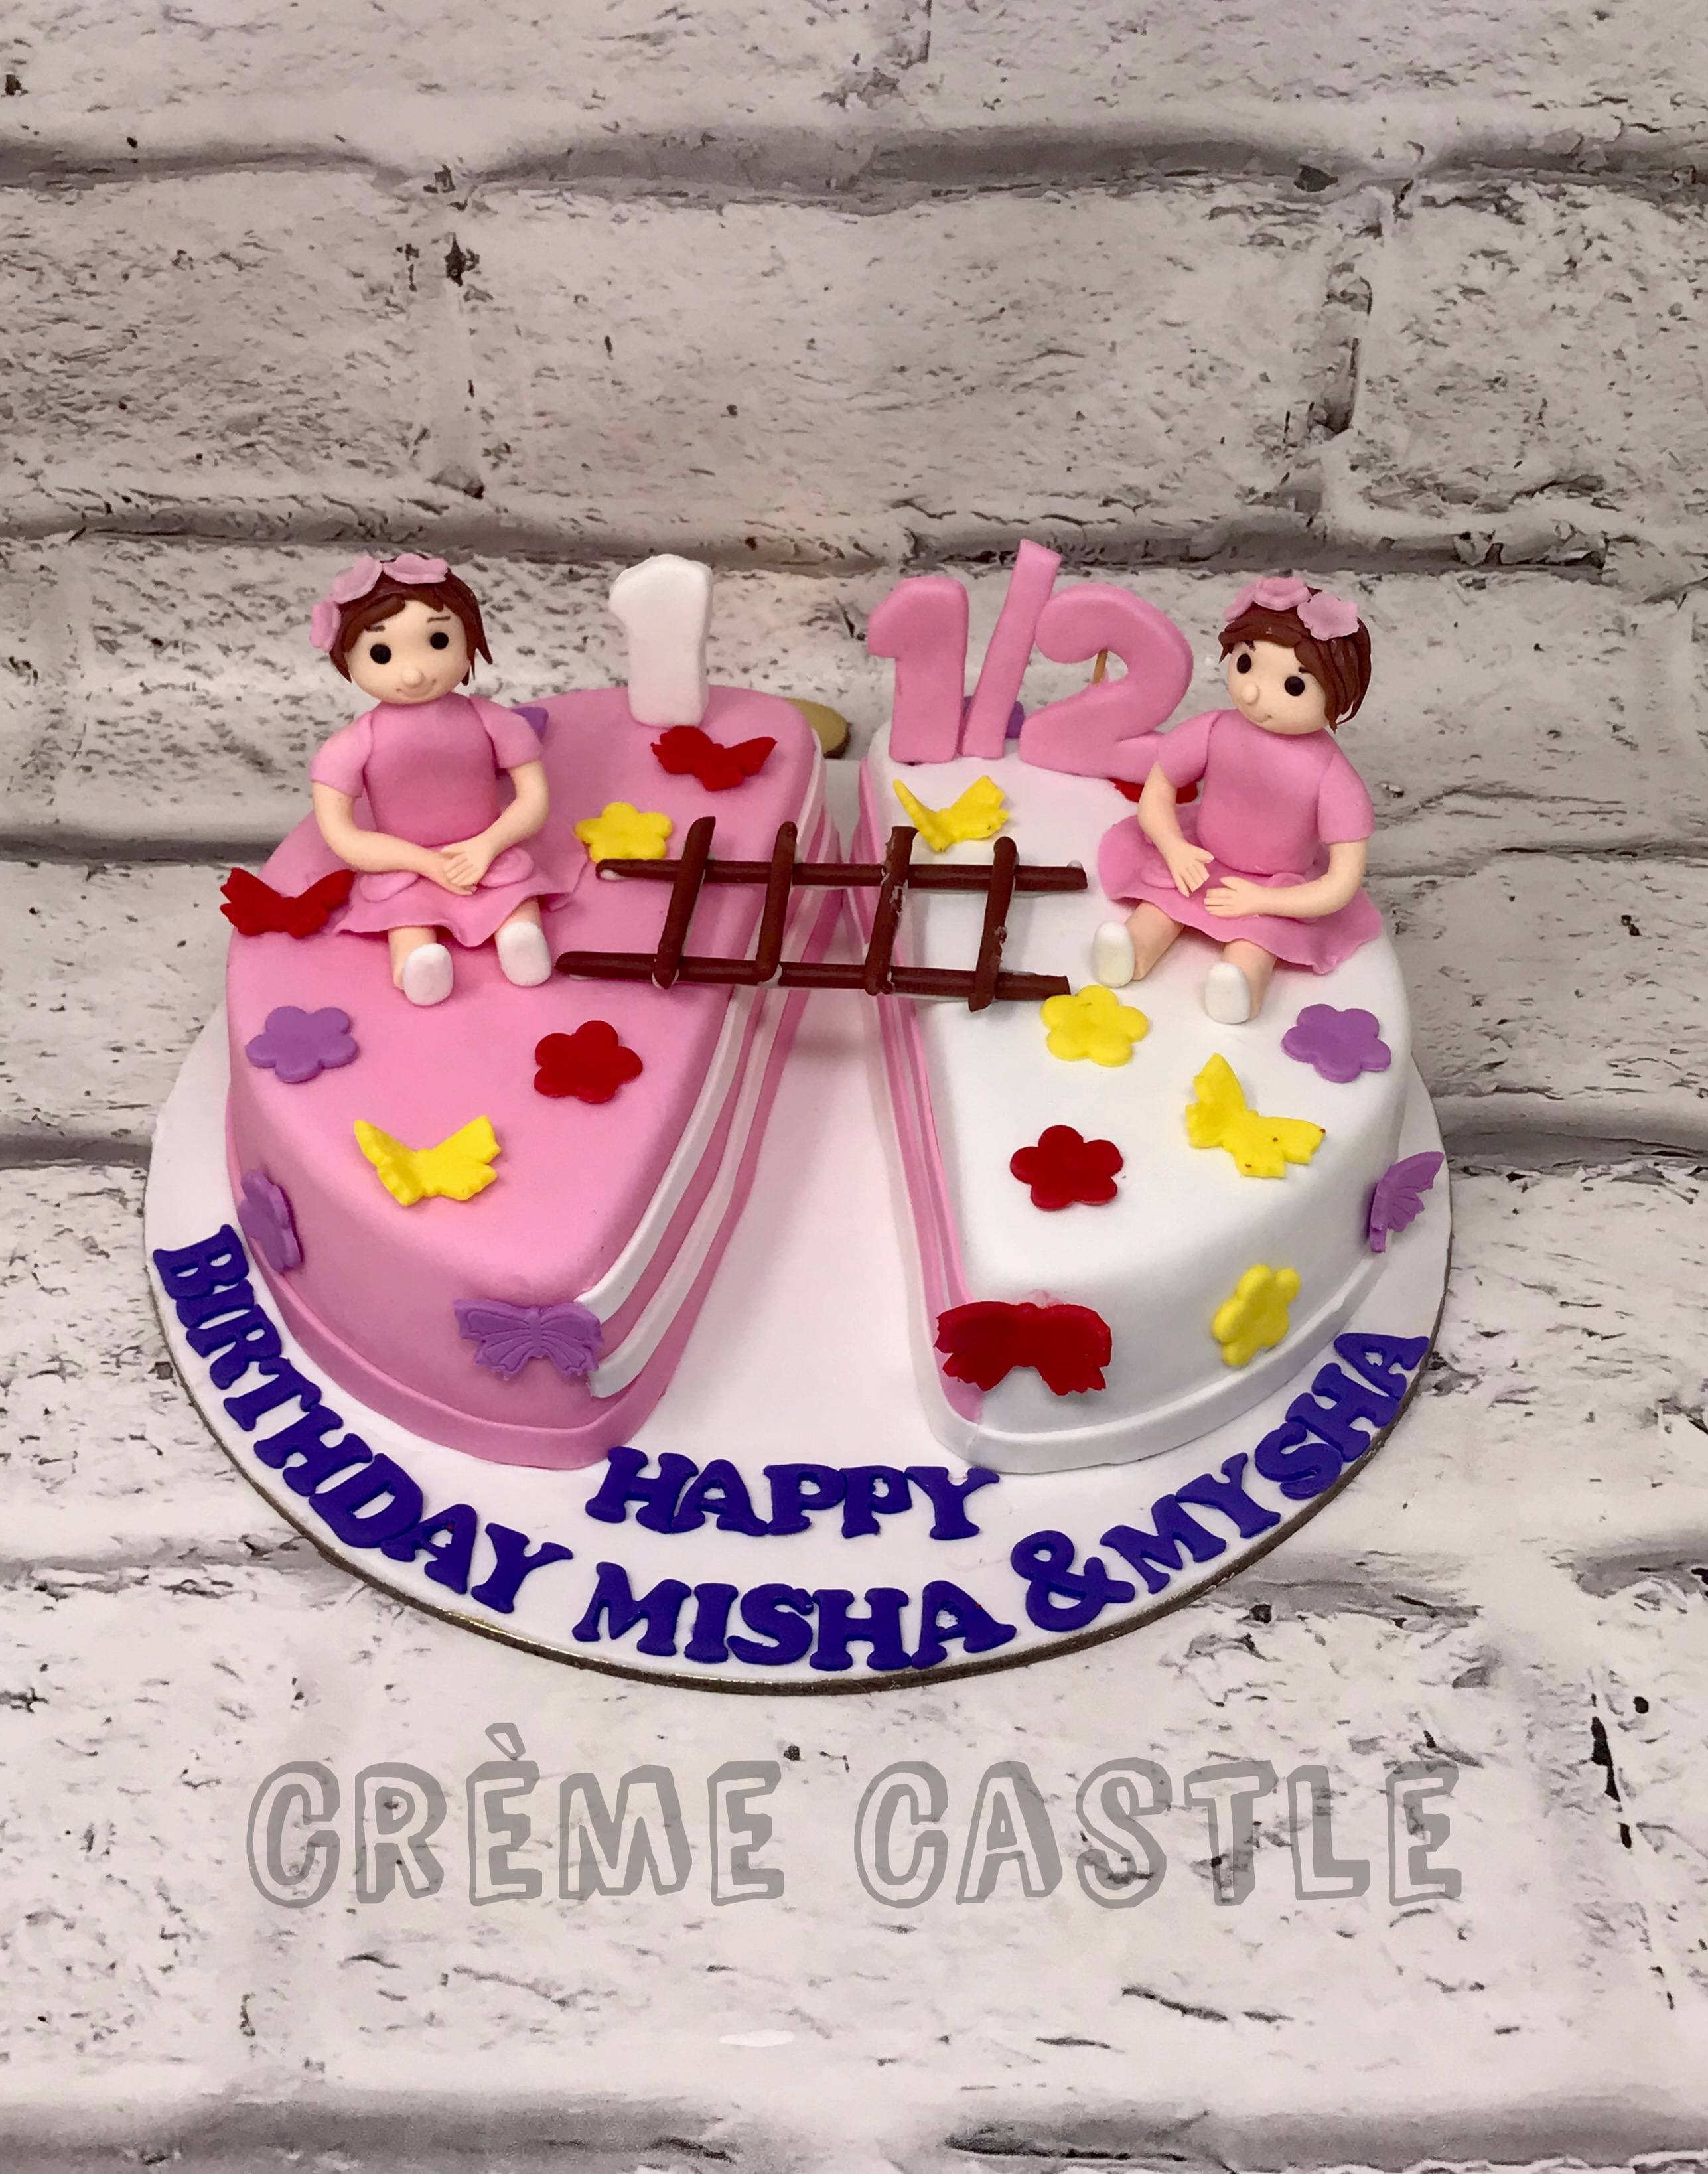 Twin Theme Birthday Cake | The best birthday cake for twins